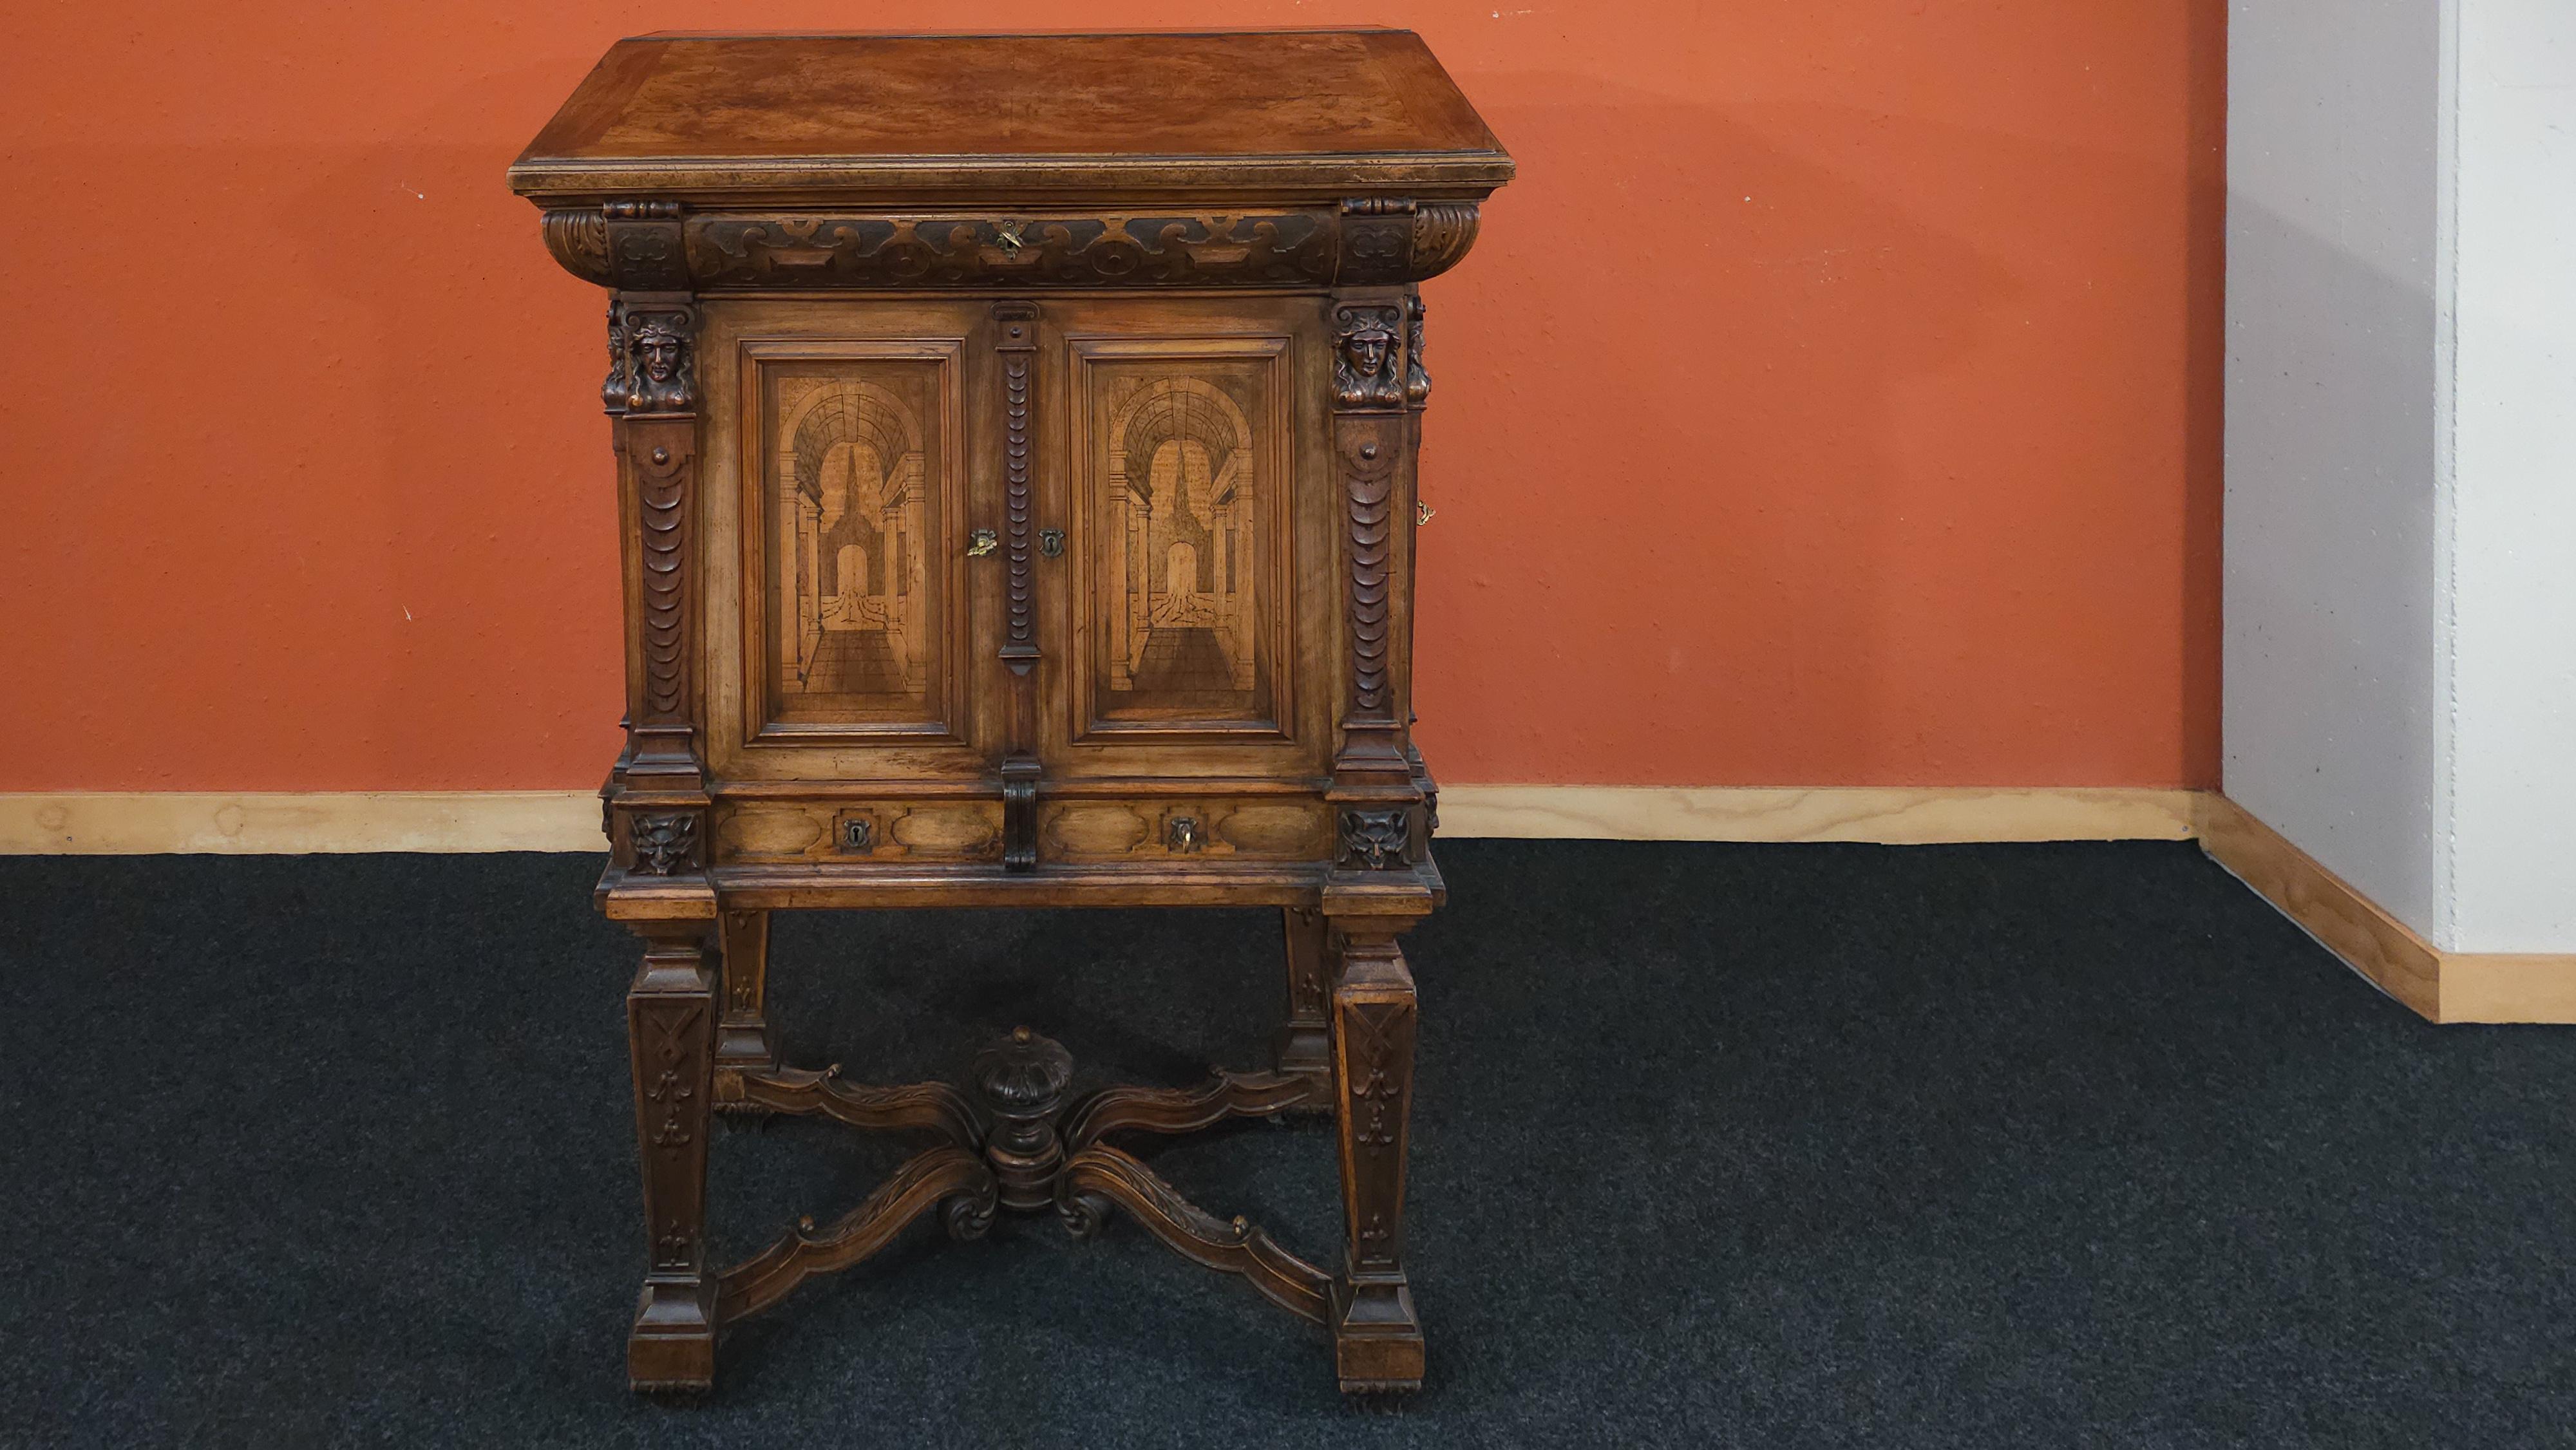 The lectern podium, dating back to the second half of the nineteenth century, stands out for its exquisite and refined construction, making it an object of superior quality. Originating from Germany, it features various inlays on each side of the